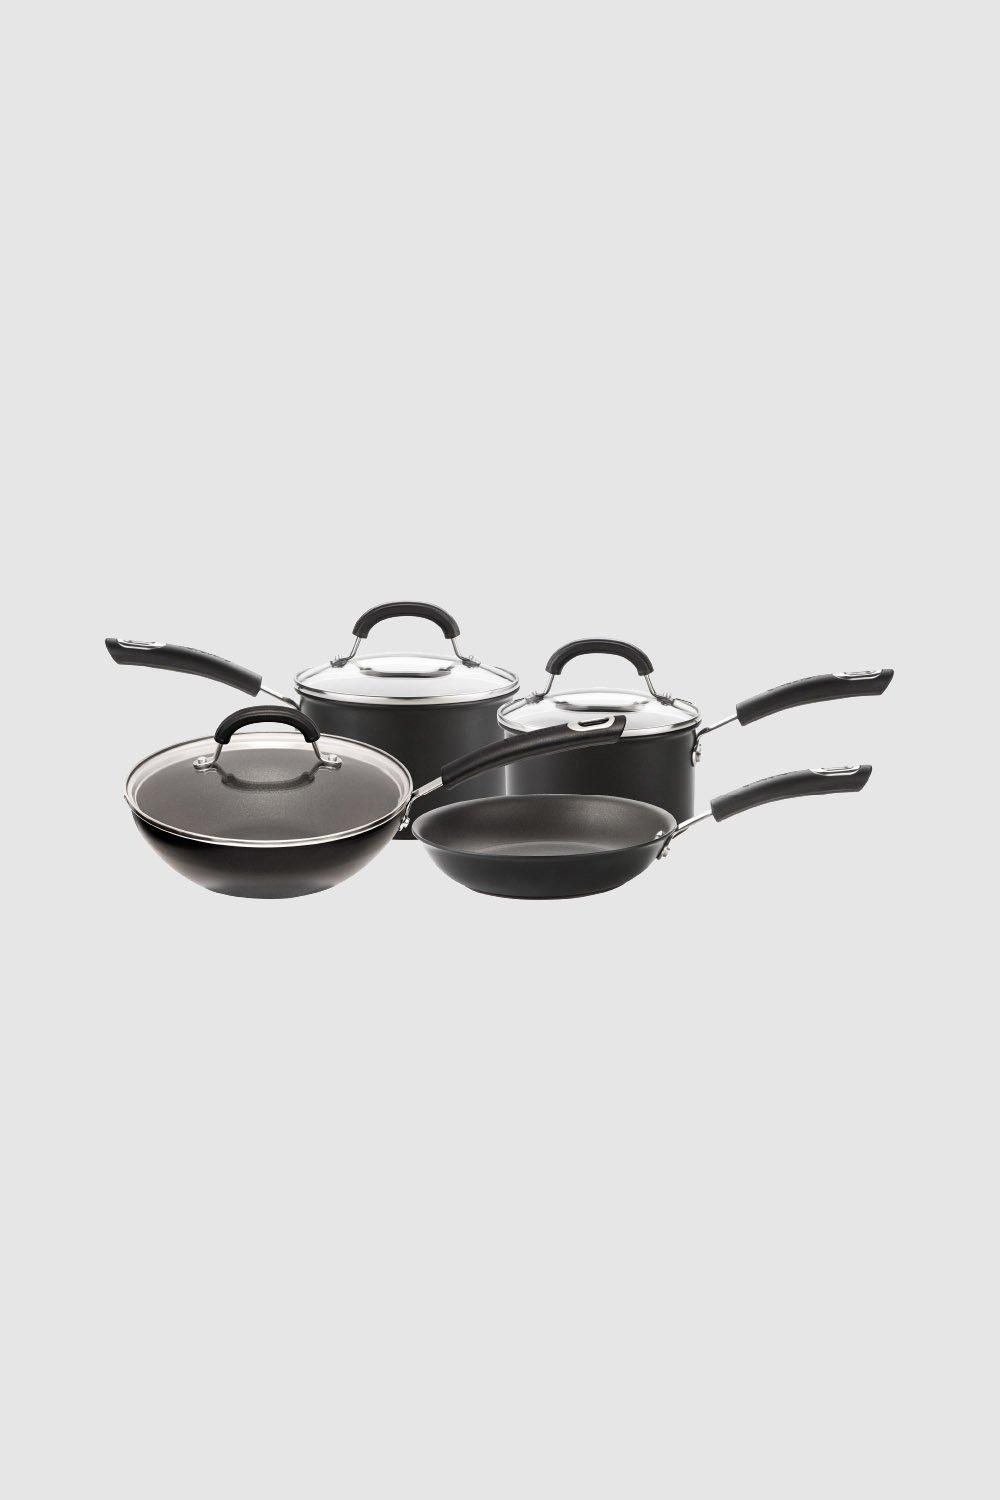 Total 4 Piece Cookware Set Non Stick Induction, Dishwasher Safe, Glass Lids, Hard Anodised Aluminium